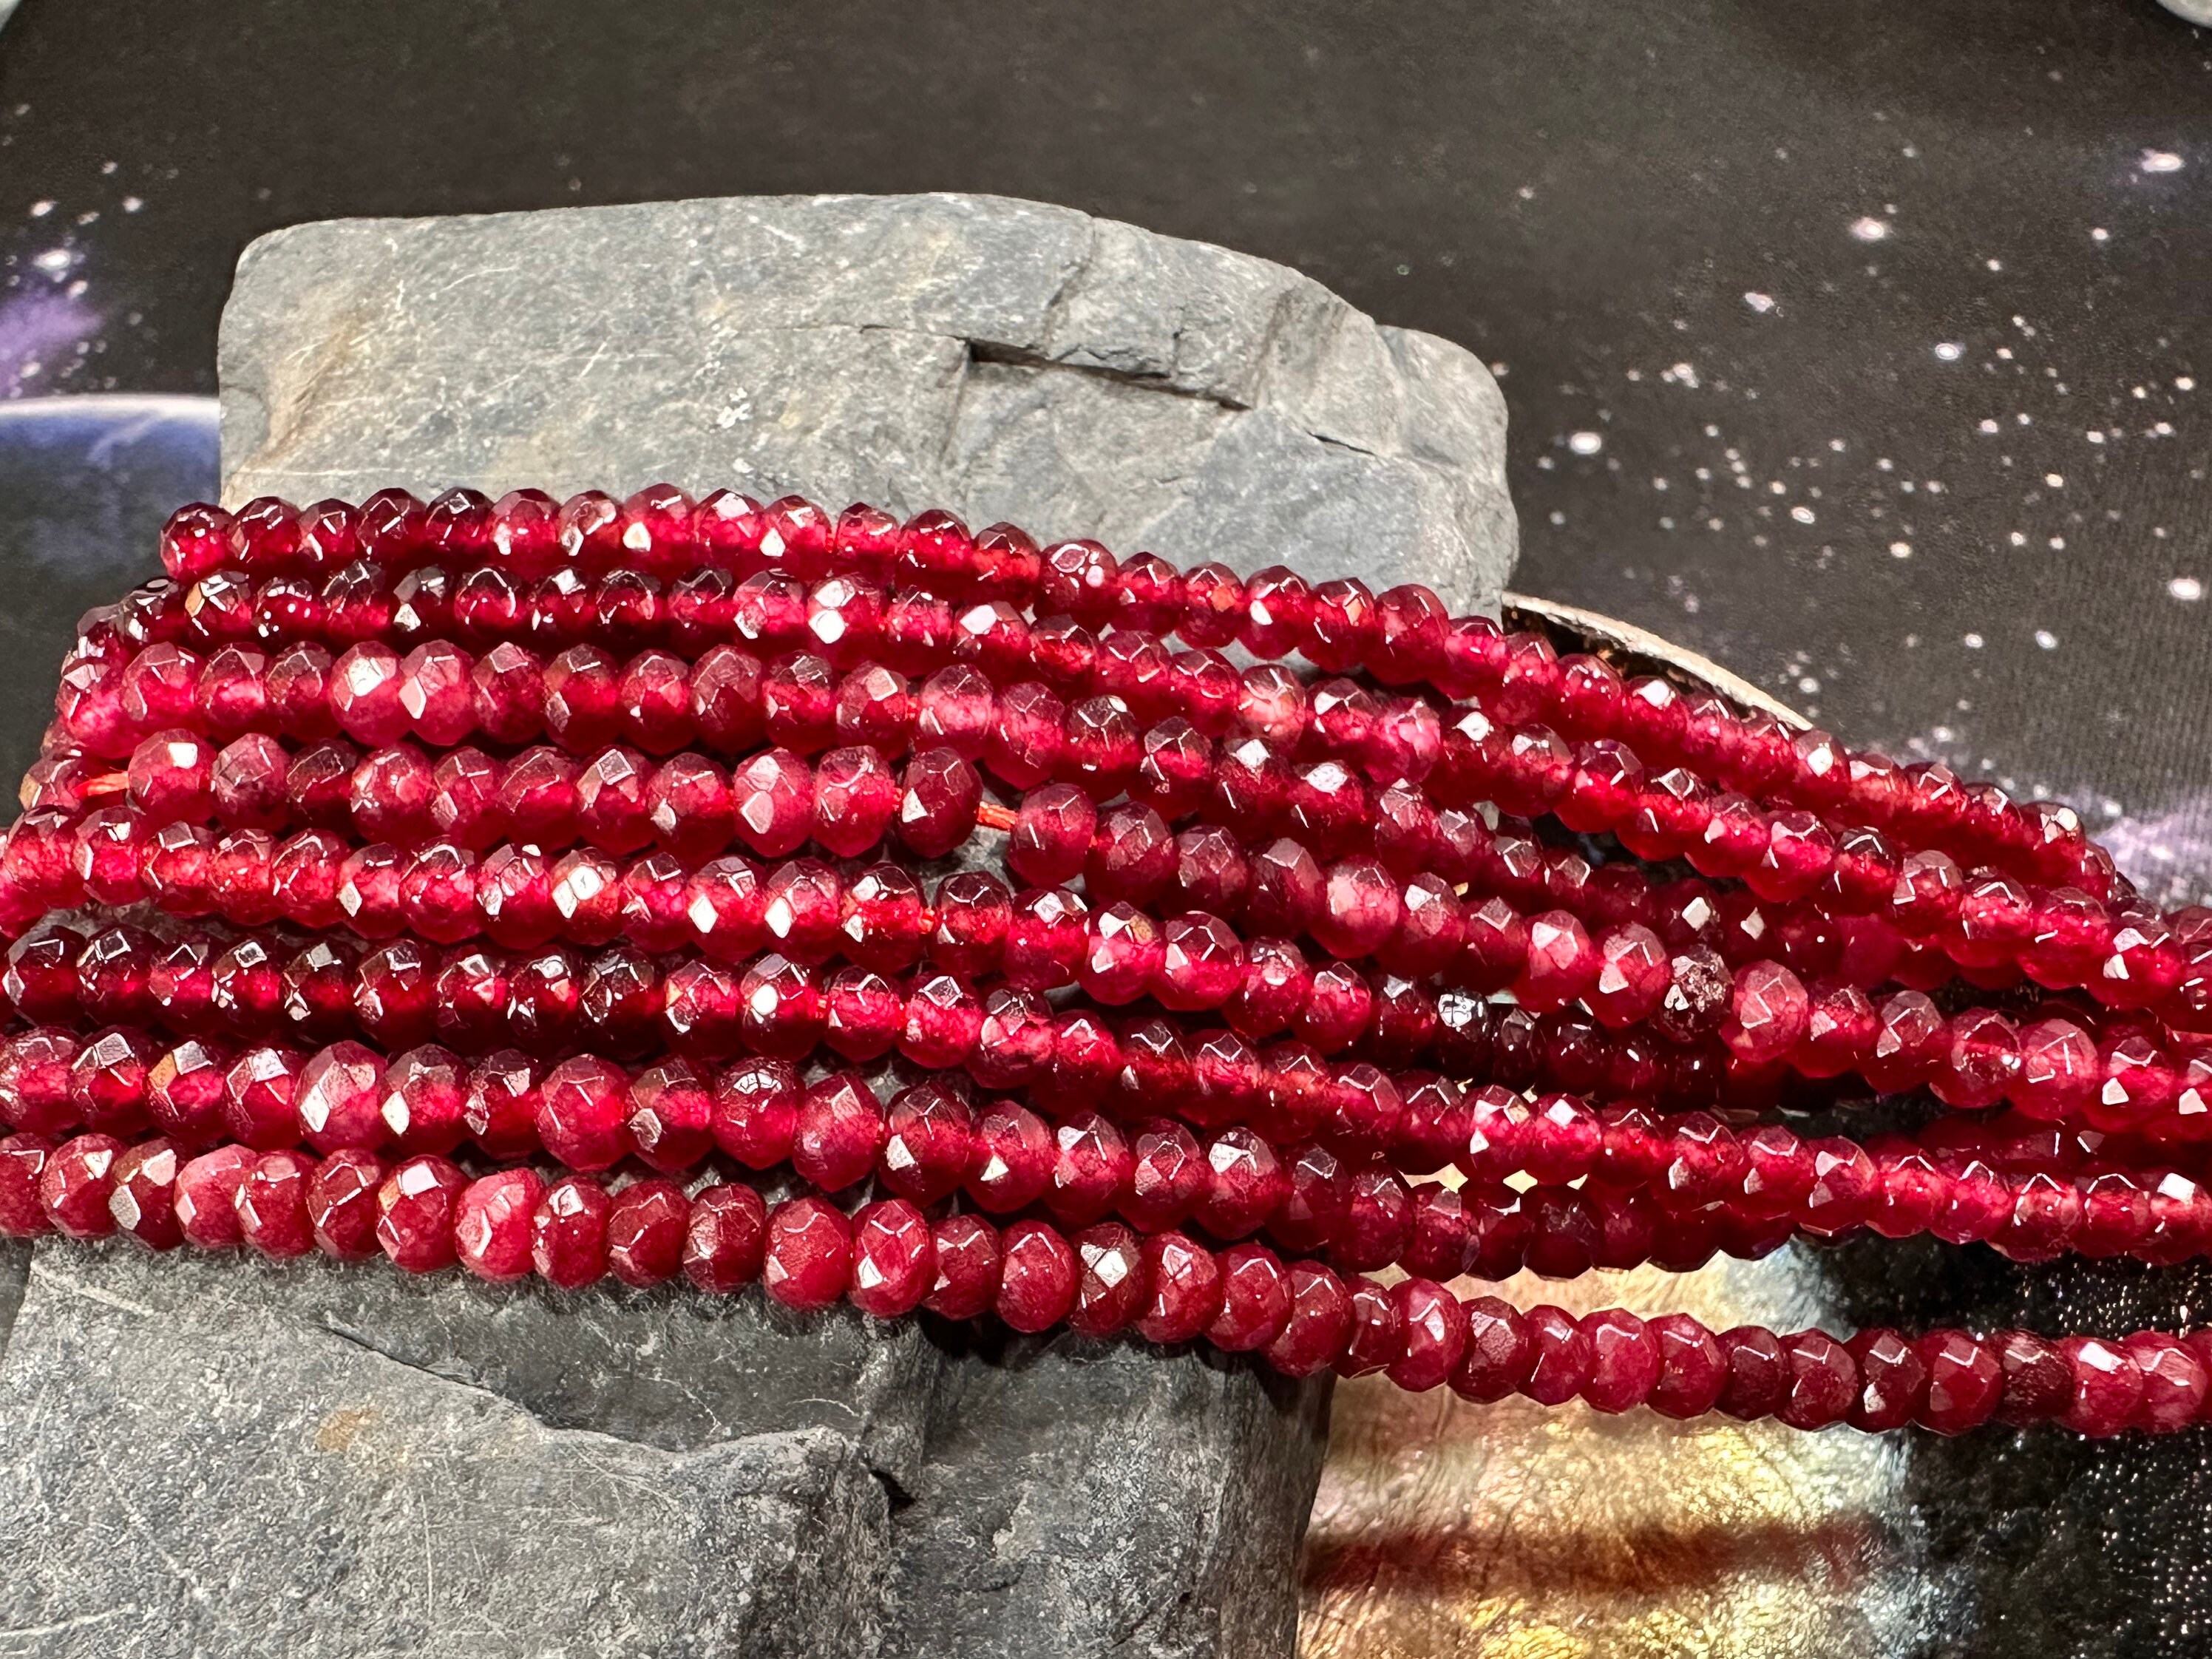 Dark Red Glass Beads, 8mm Faceted Round - Golden Age Beads